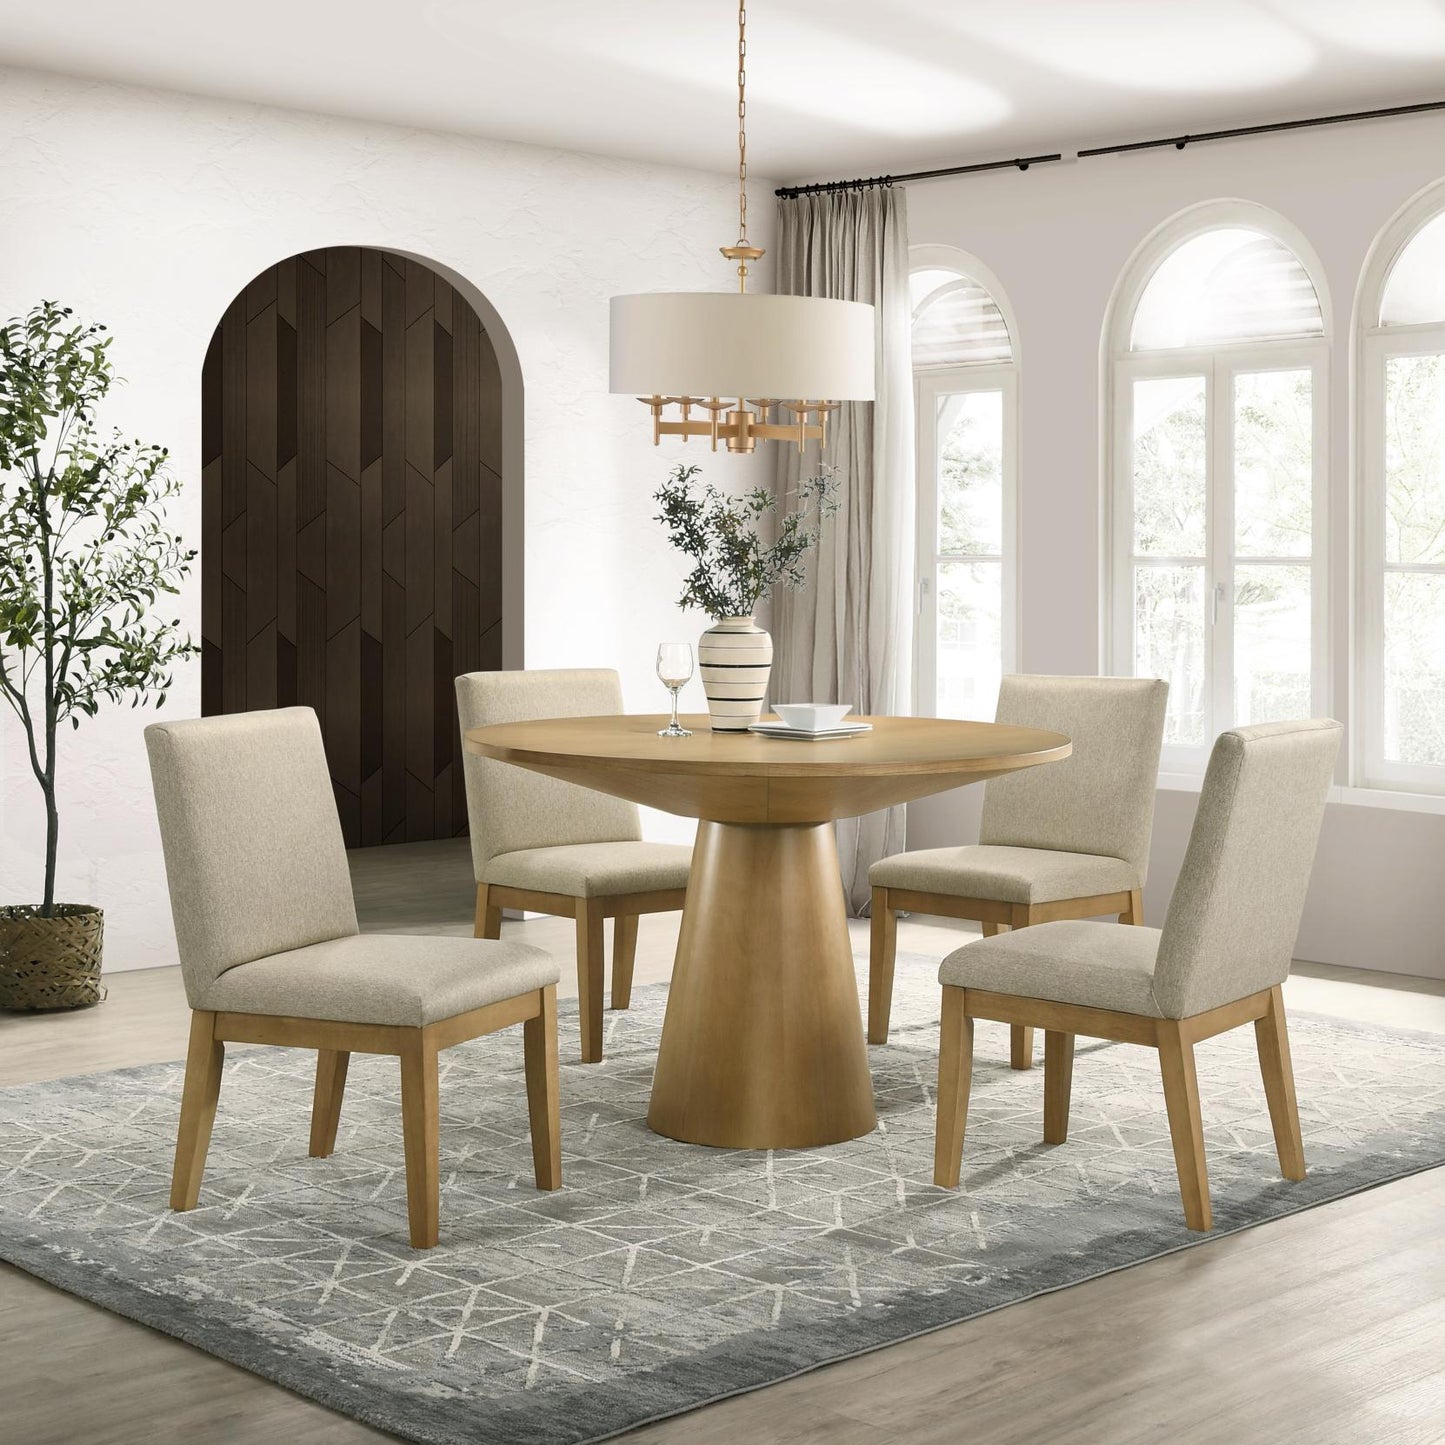 Roundhill Furniture Rocco Contemporary Dining Set, Round Pedestal Table with 4 Chairs